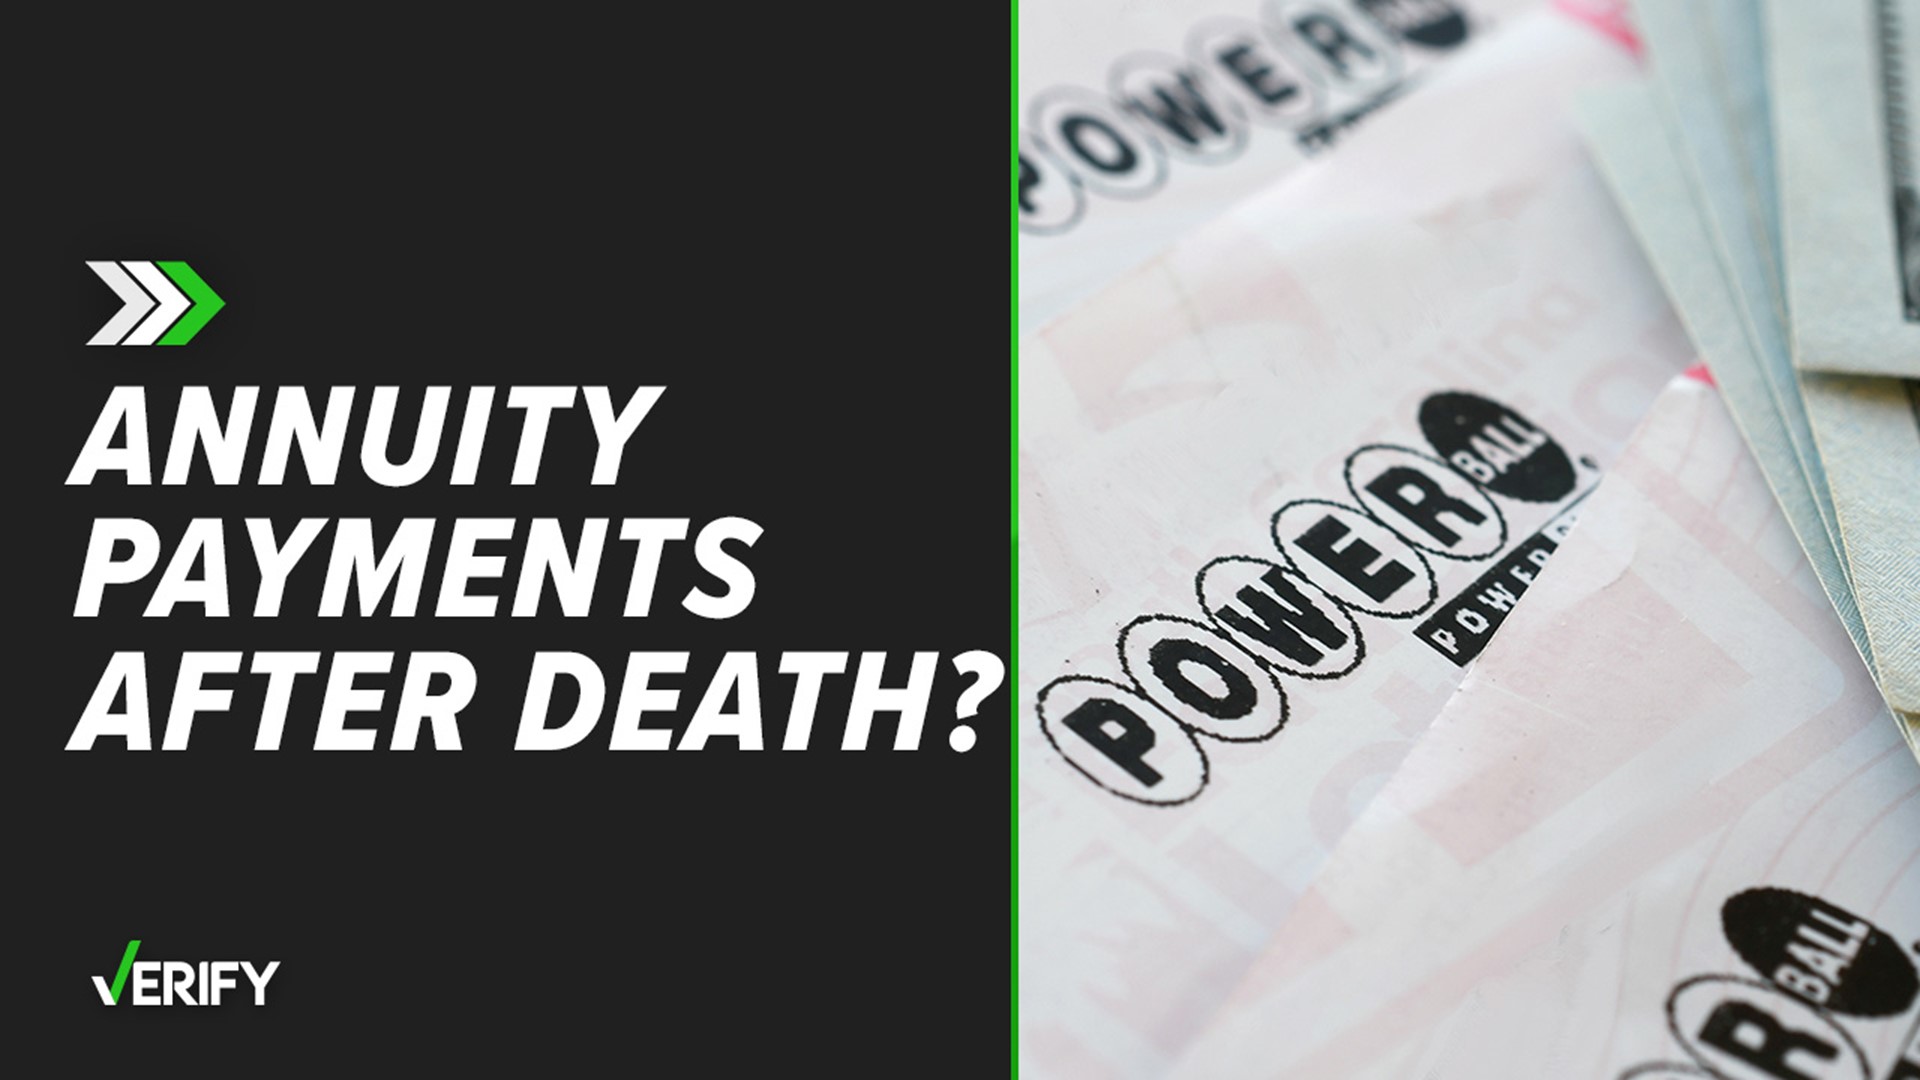 If a jackpot winner chooses to receive their prize in annual annuity payments and they die before all payments are made, the rest of the prize goes to their estate.